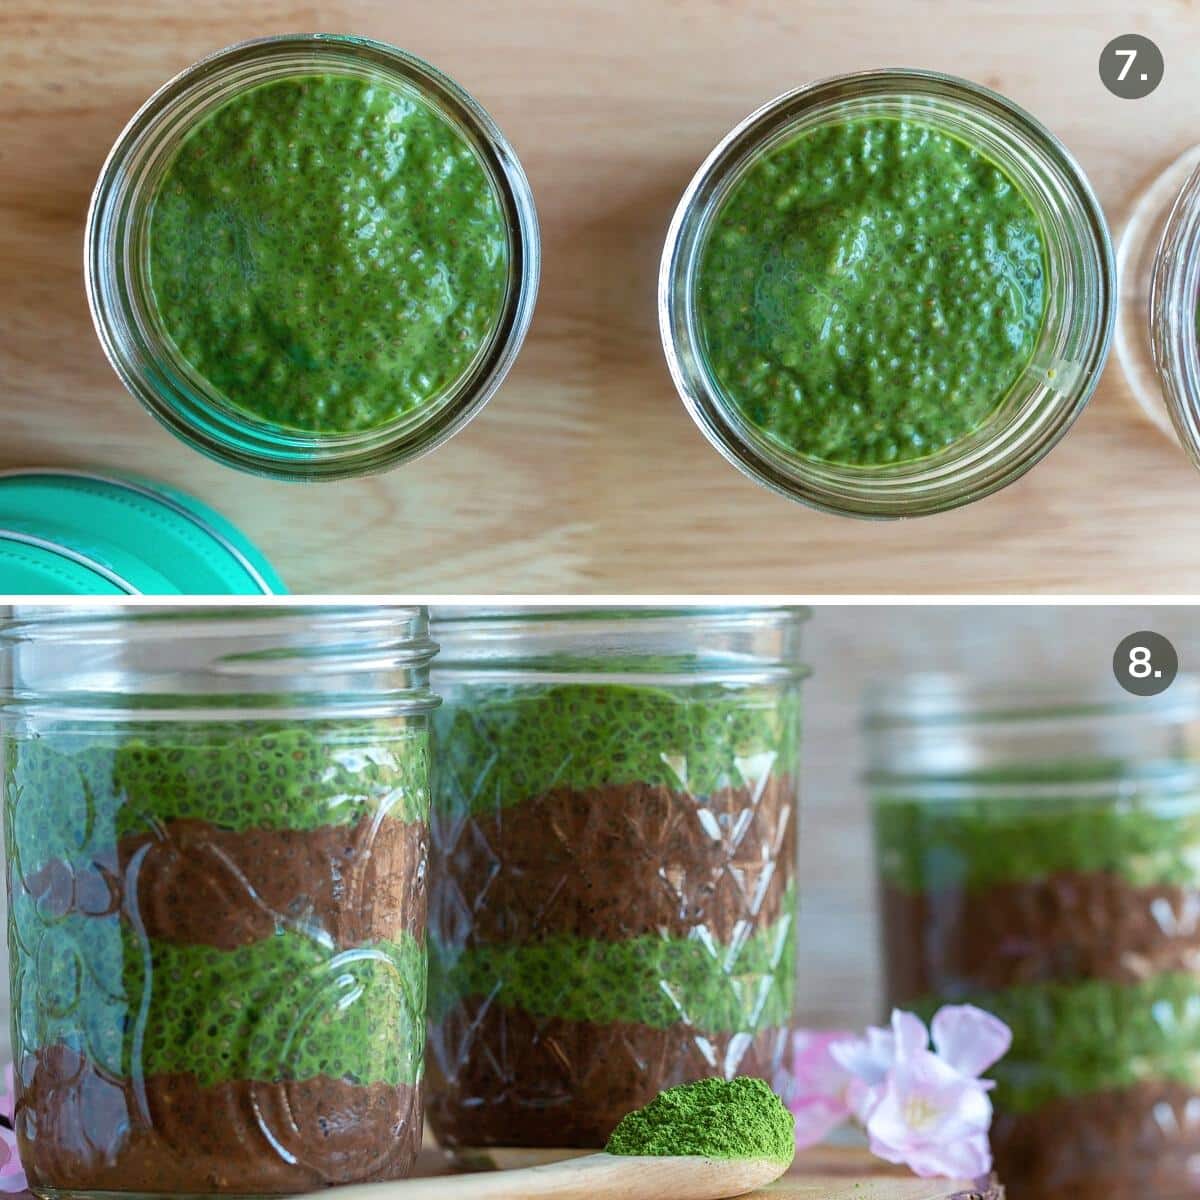 Matcha chia seed pudding added into the mason jars showing the layers.